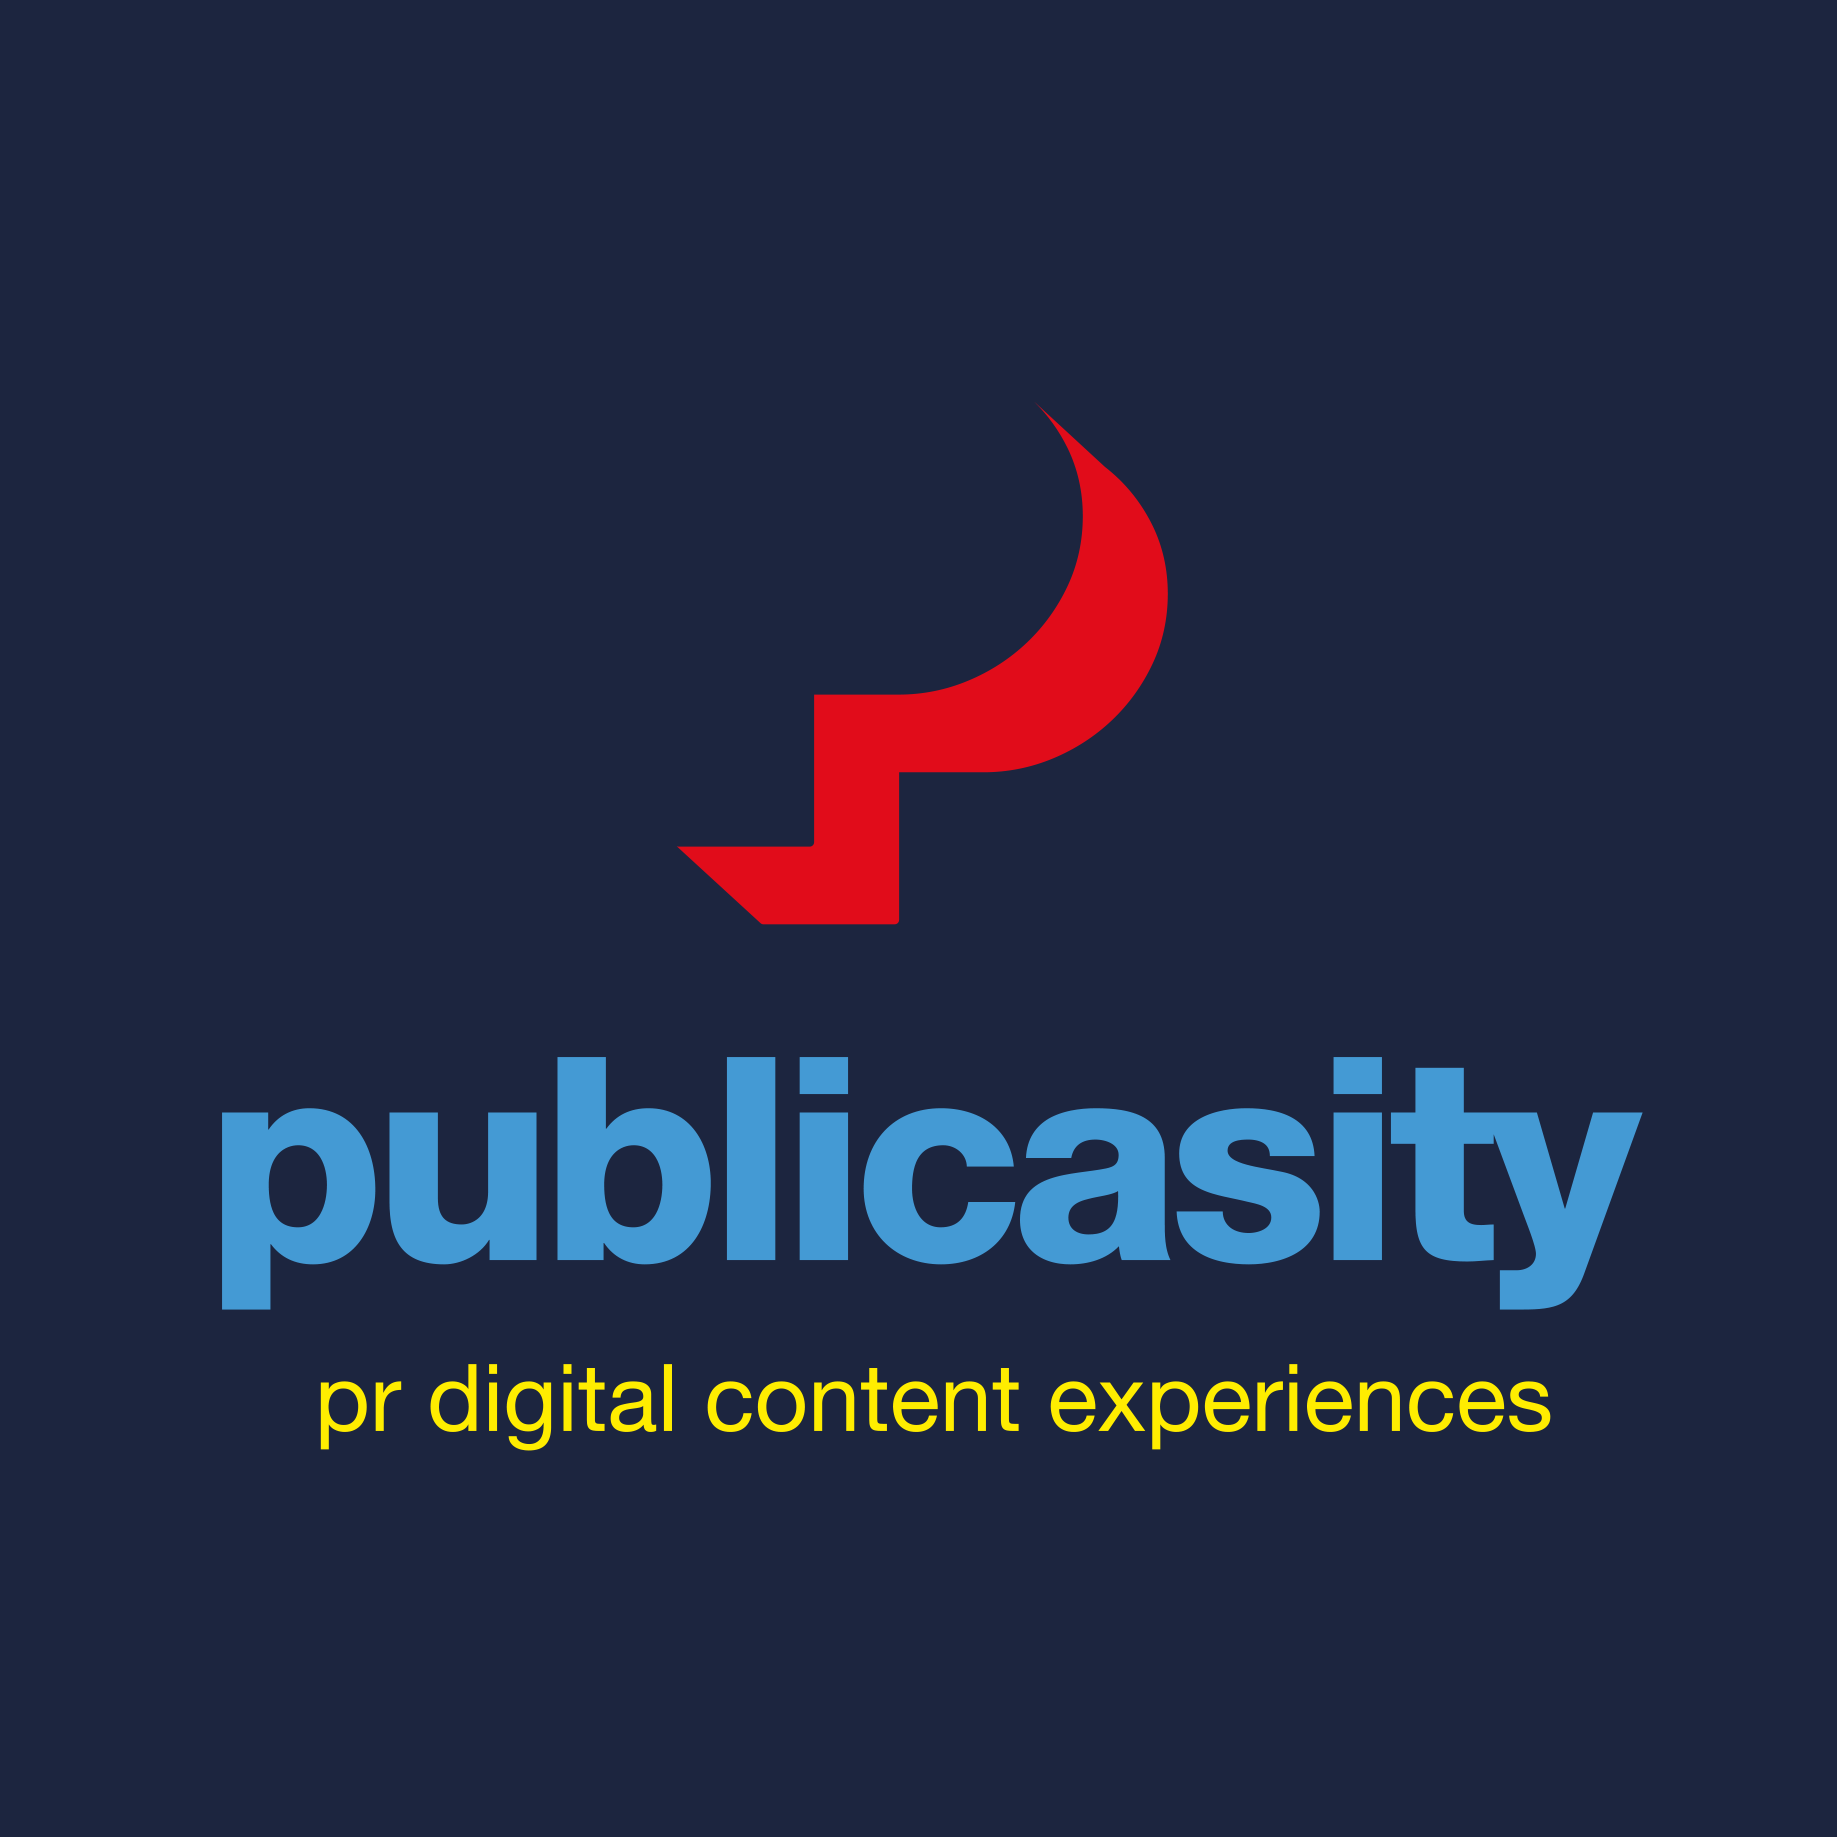 Welcome to Publicasity’s New Look